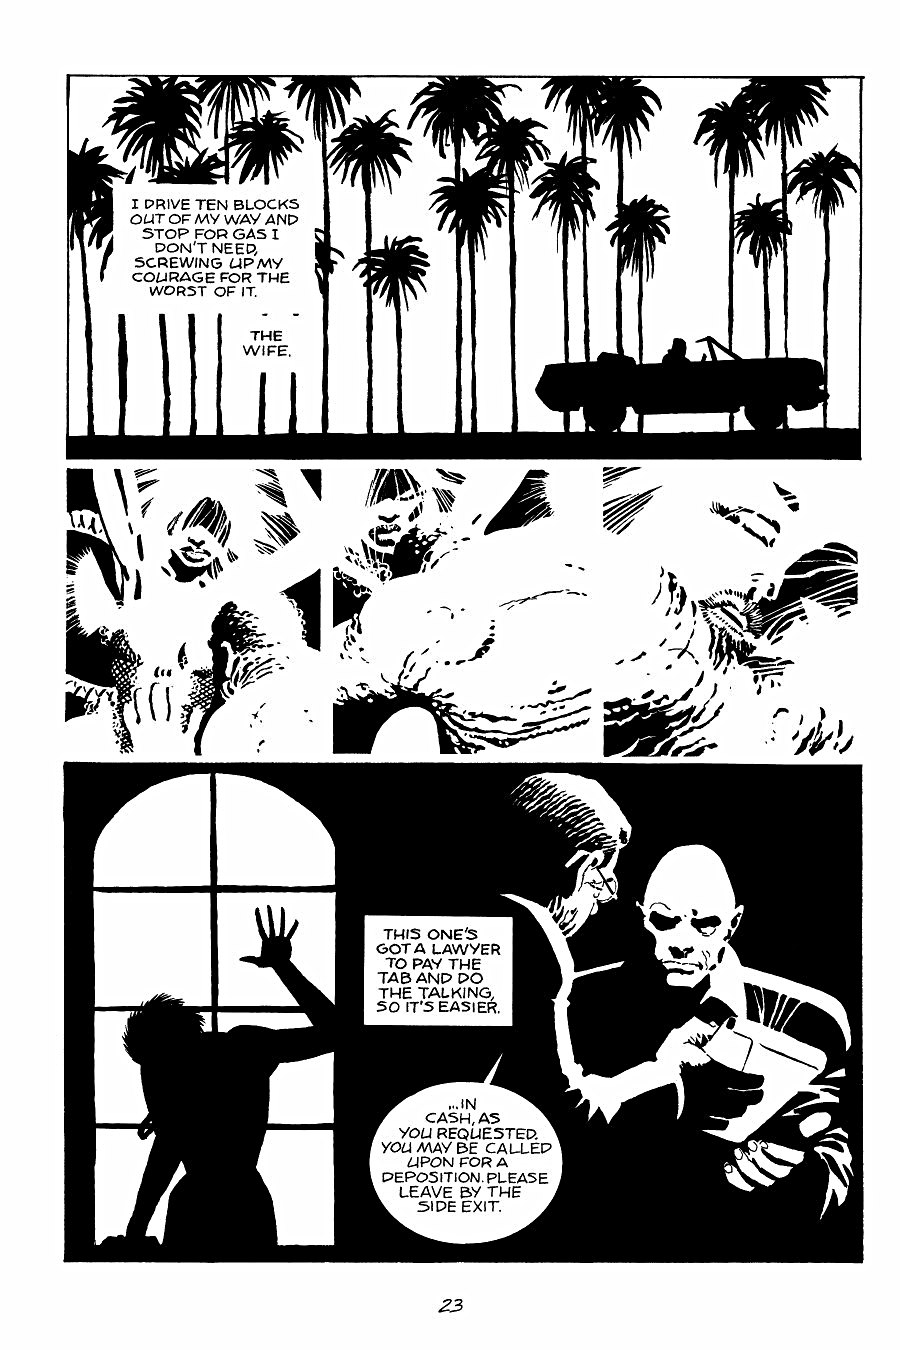 page 23 of sin city 2 the hard goodbye